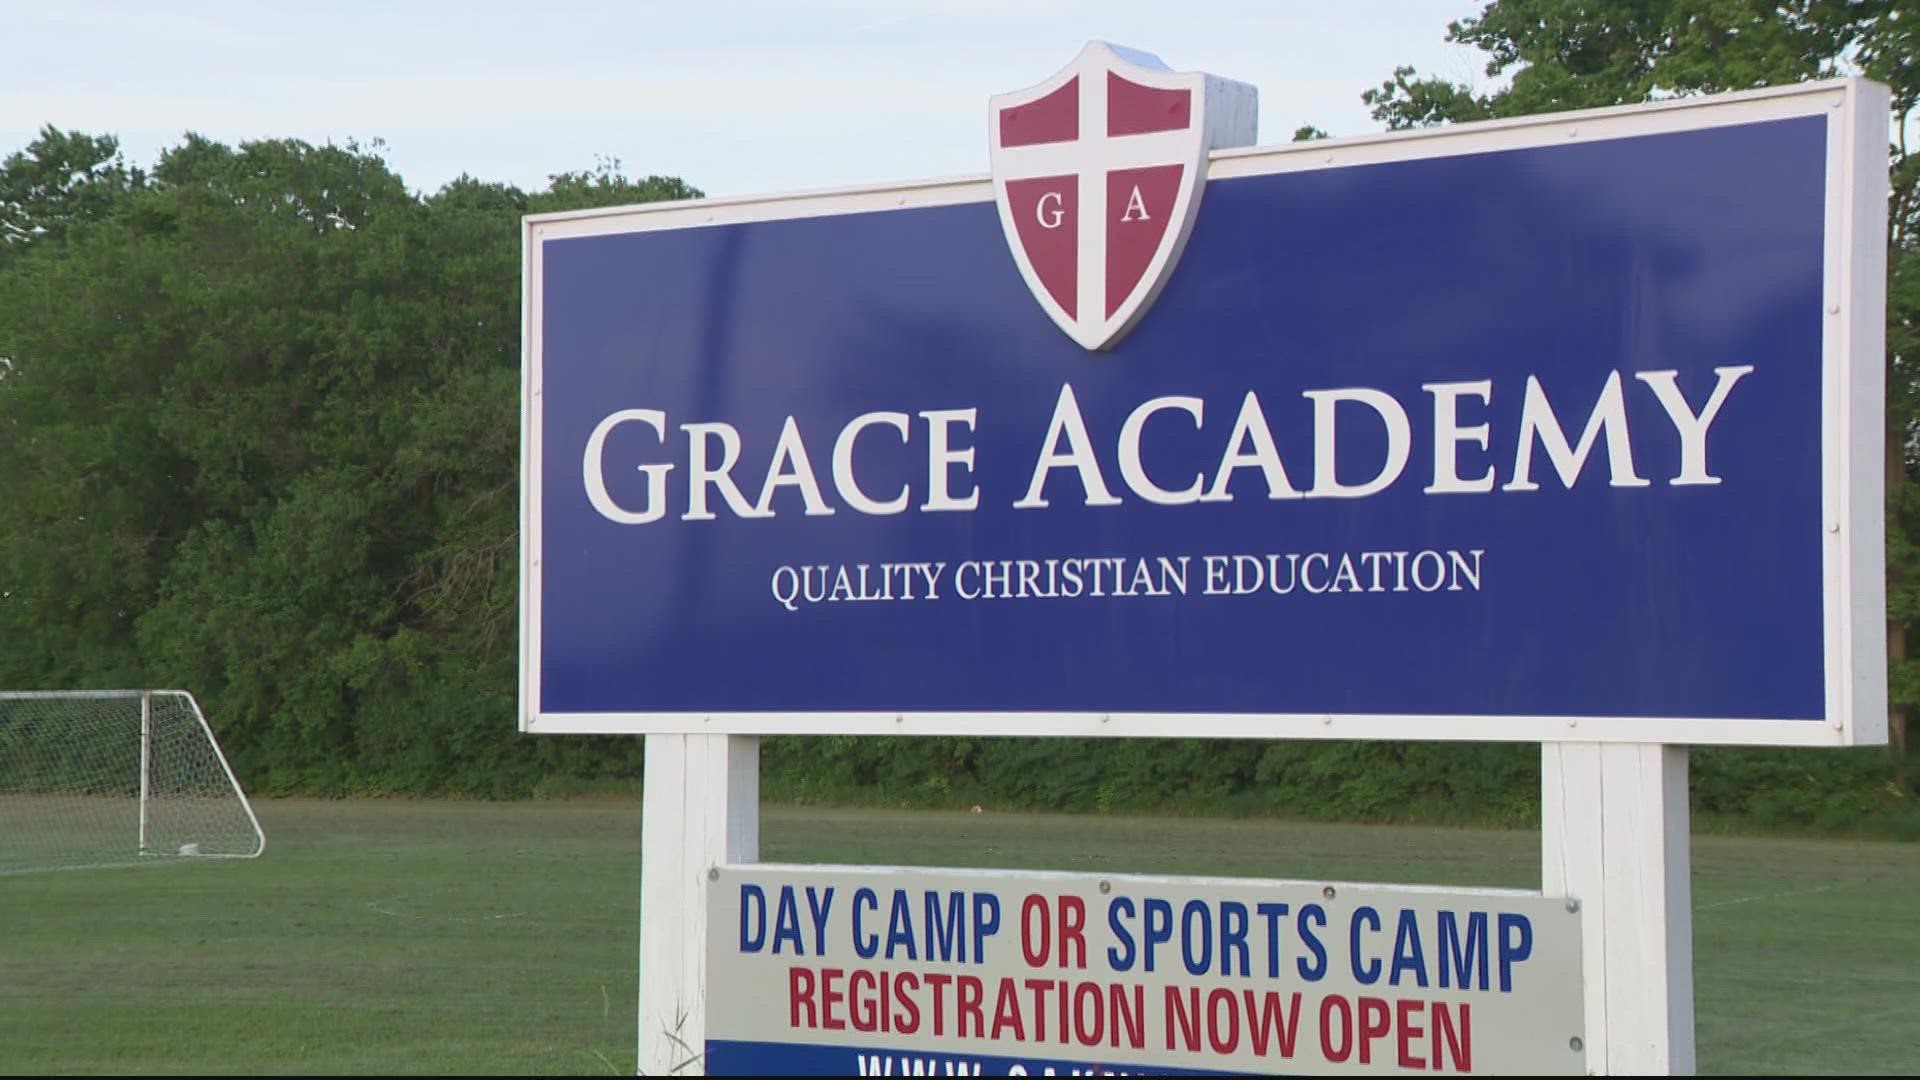 Two Hagerstown mothers say their child was denied by a private Christian academy because of their quote “lifestyle.”